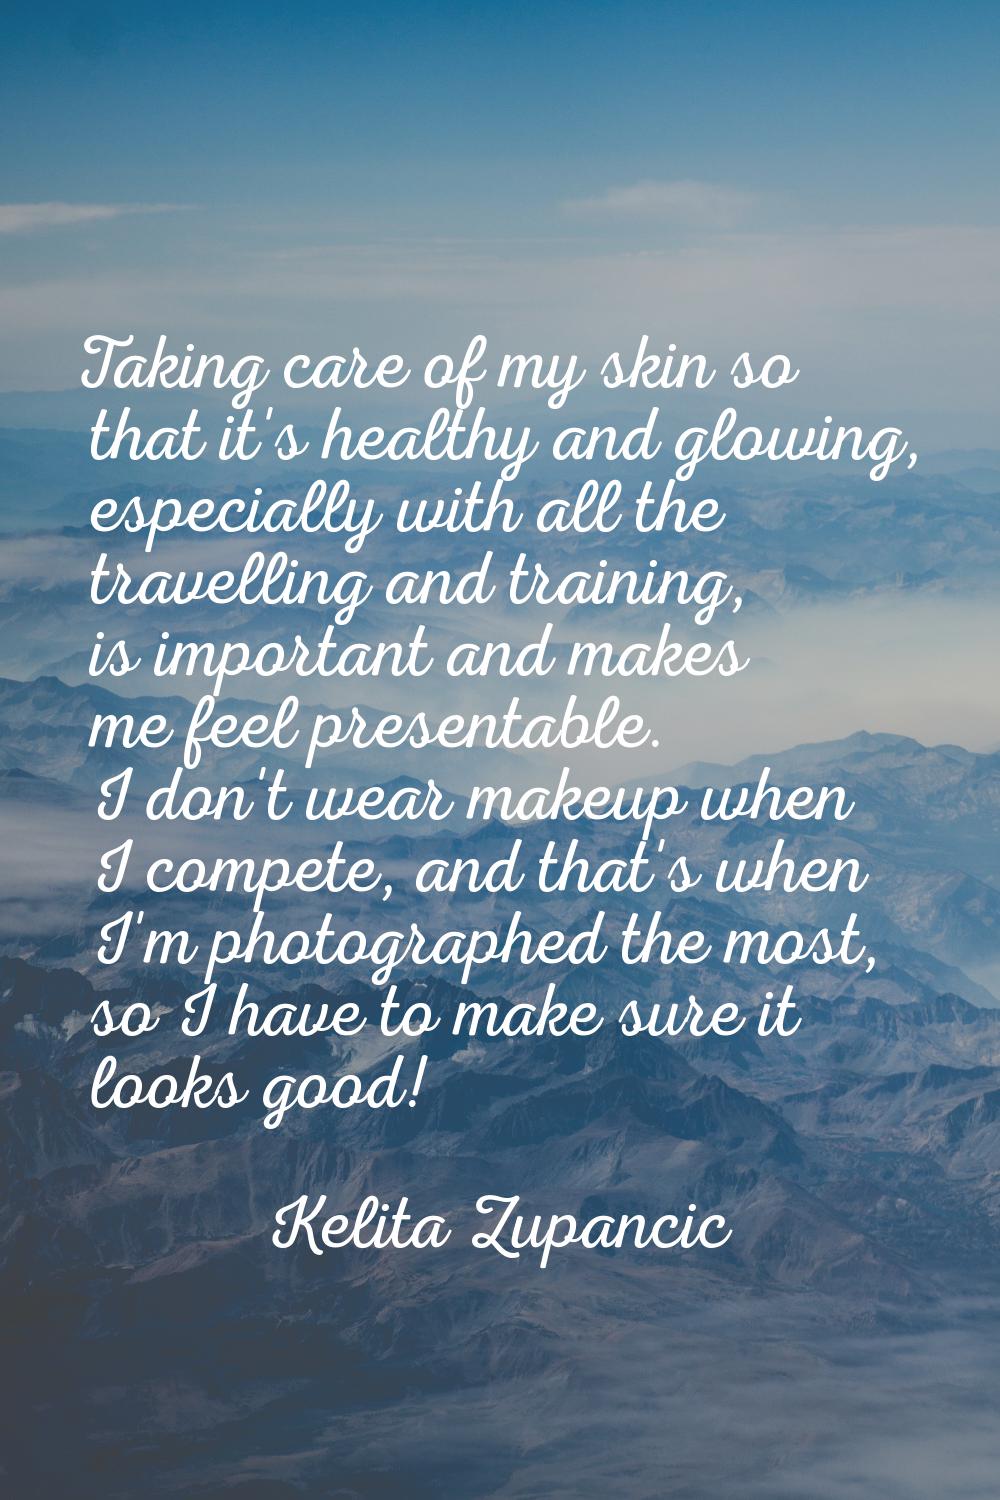 Taking care of my skin so that it's healthy and glowing, especially with all the travelling and tra